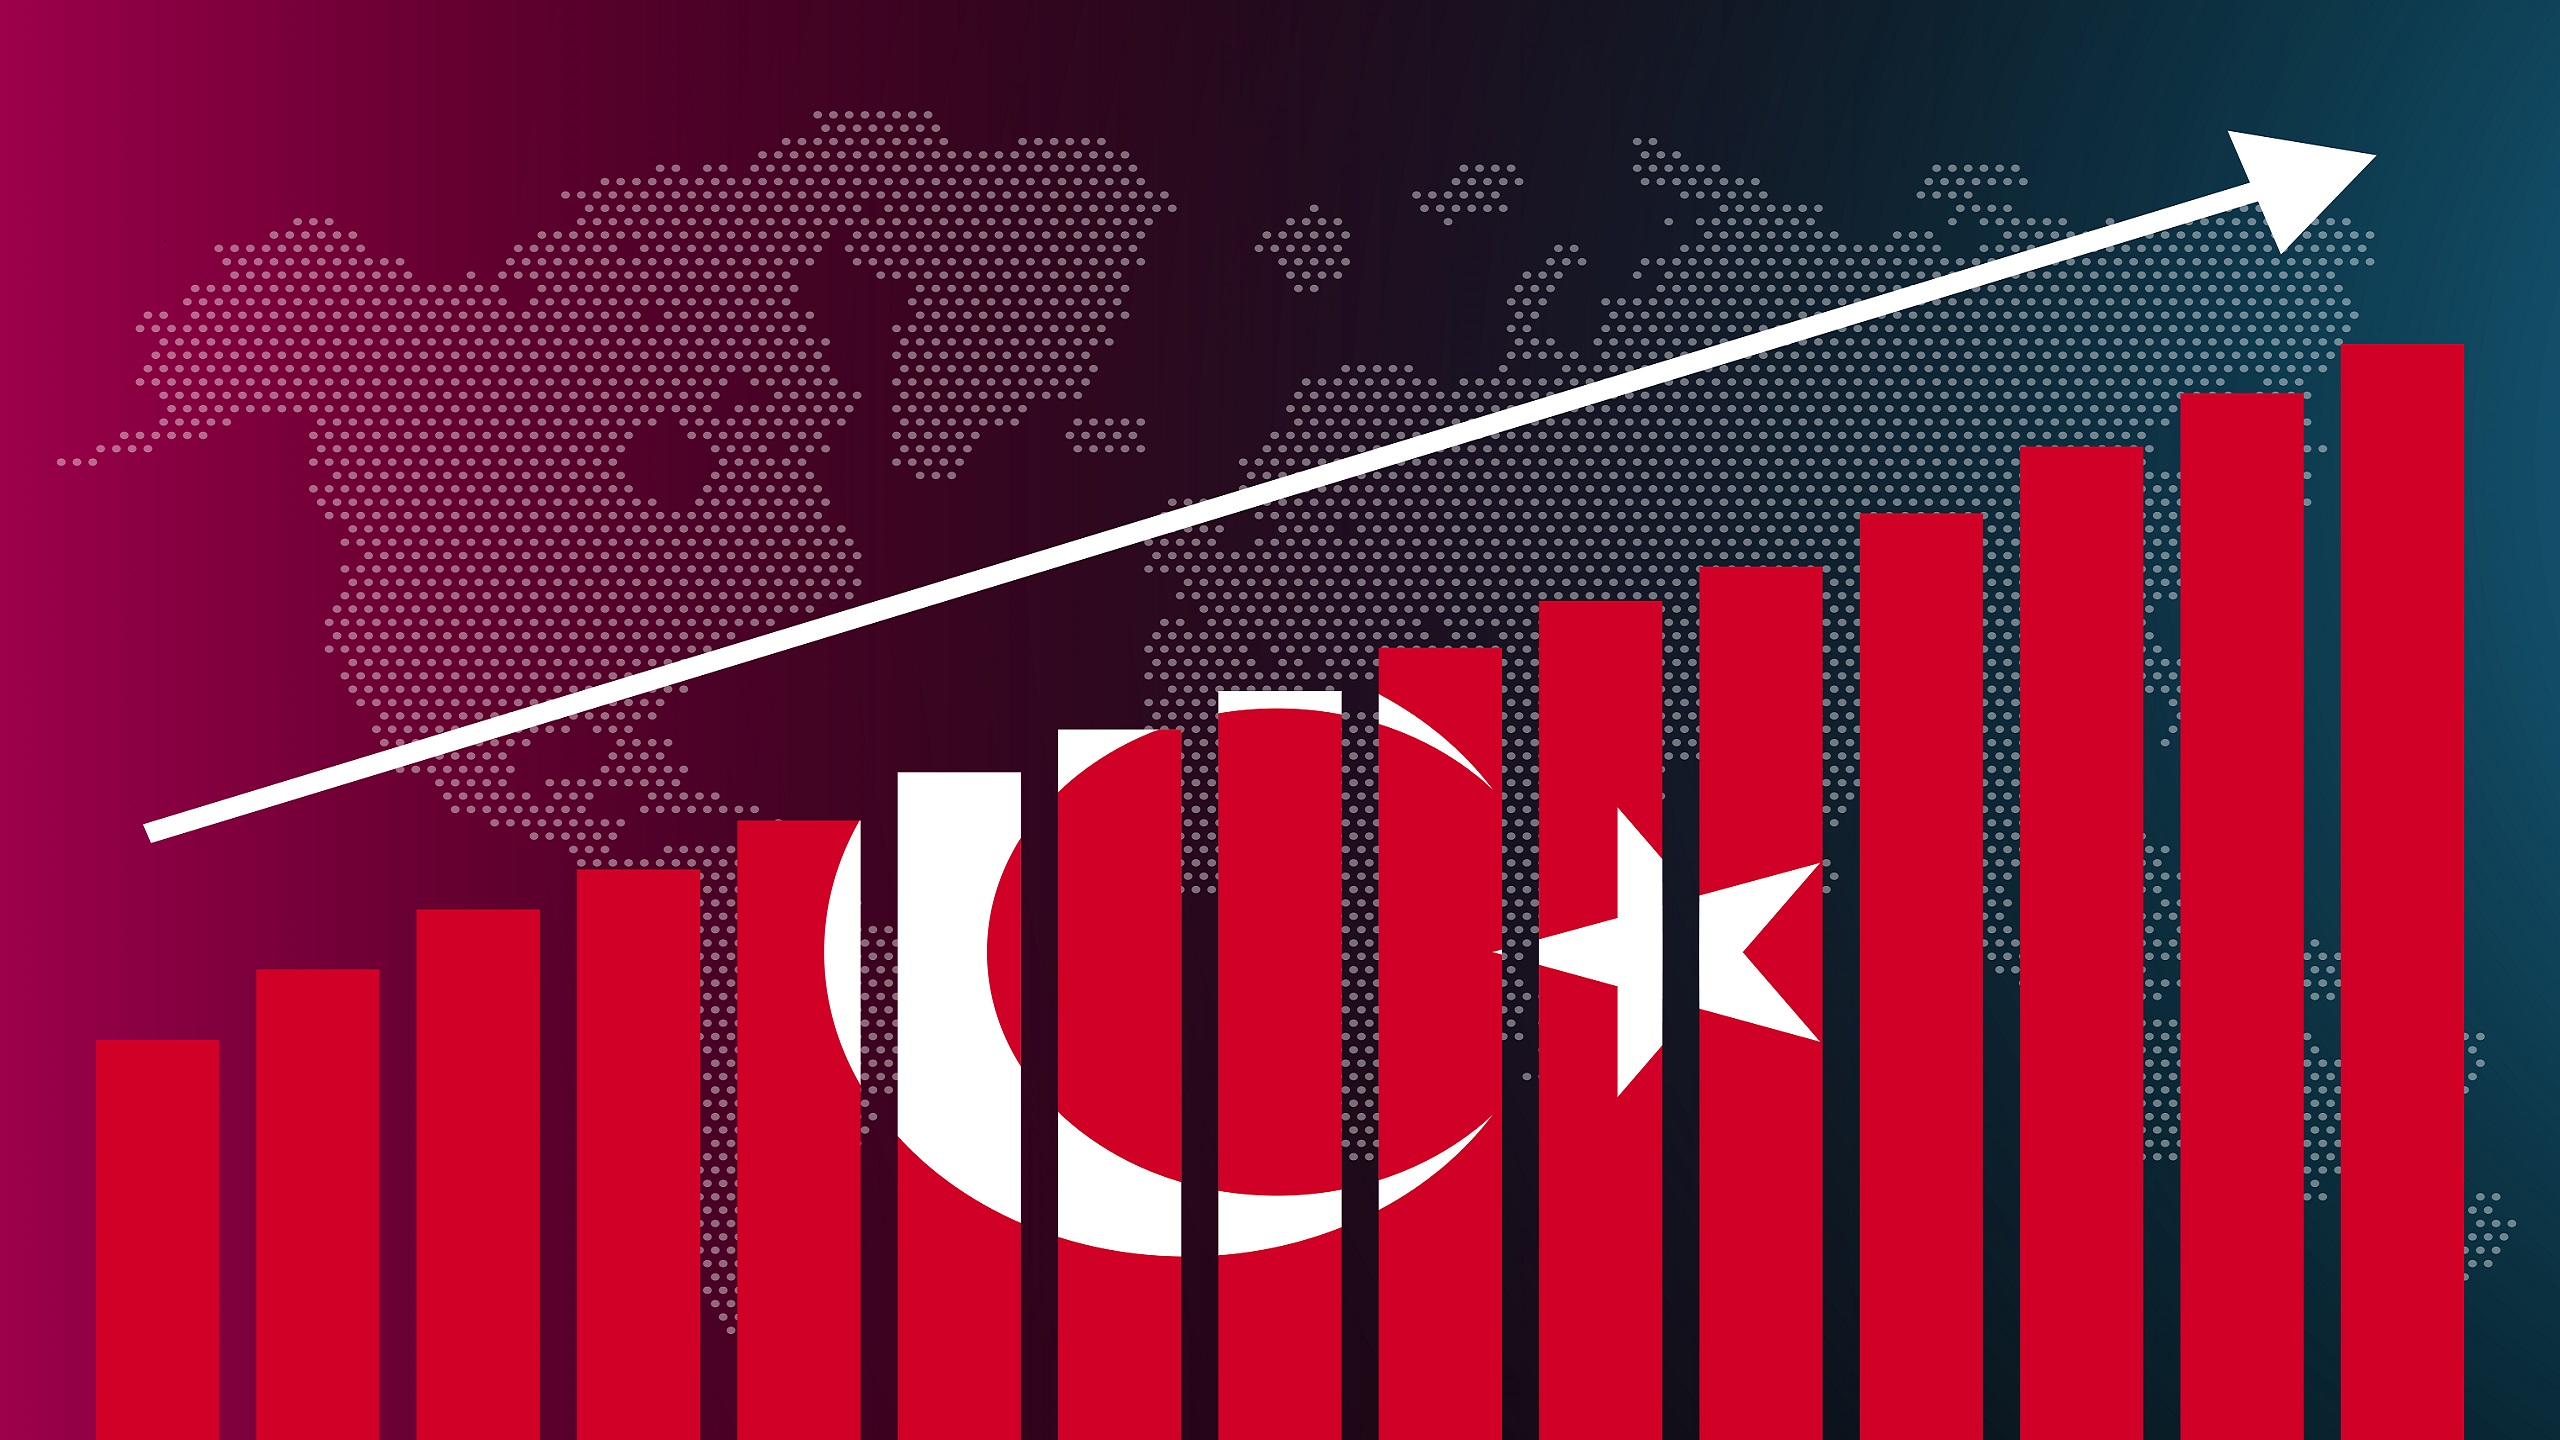 Turkey’s Economy Exceeds Expectations With Q1 Growth Despite Inflation